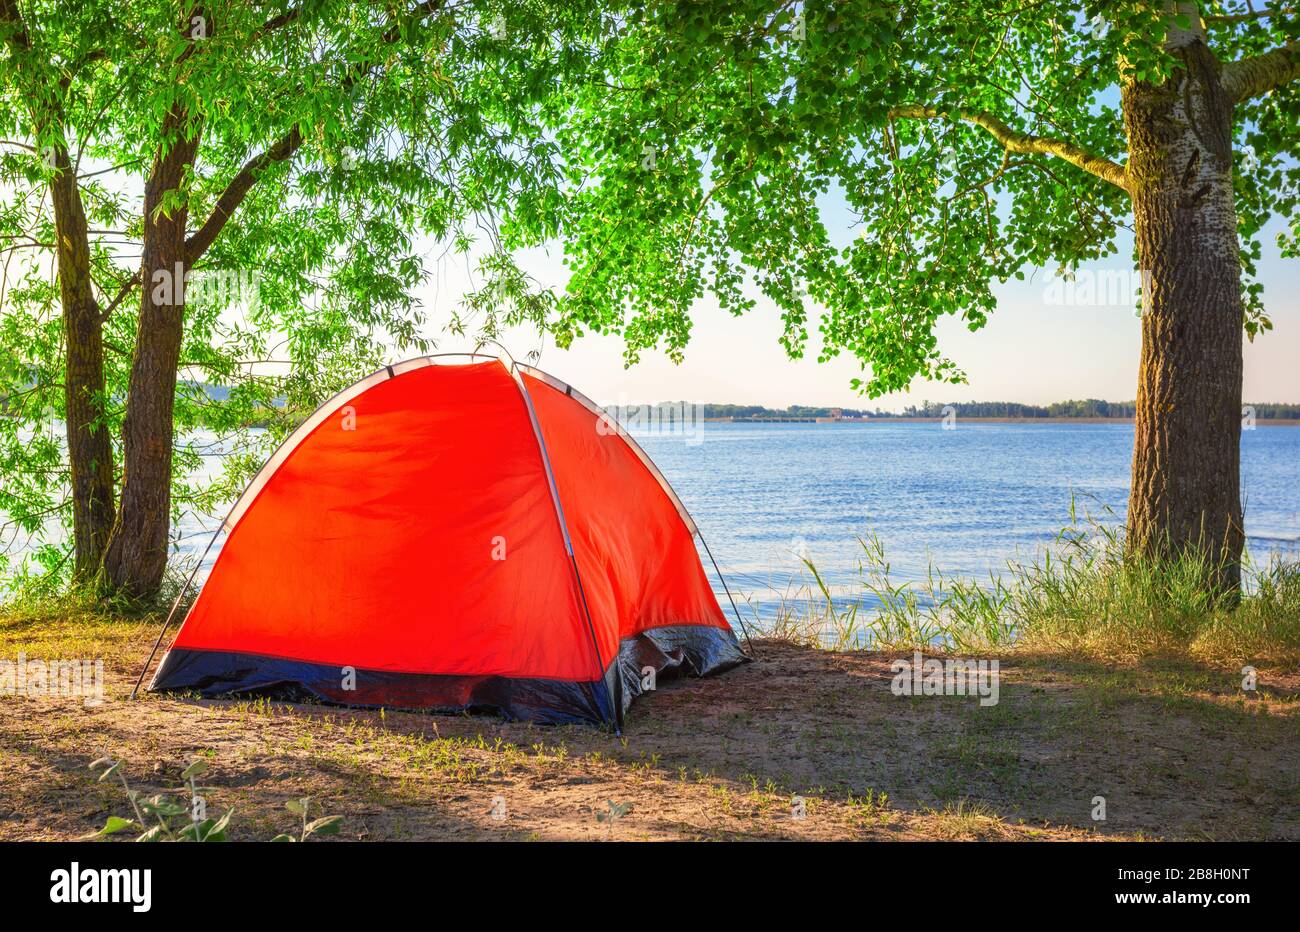 Red tourist tent on lake in summer Stock Photo